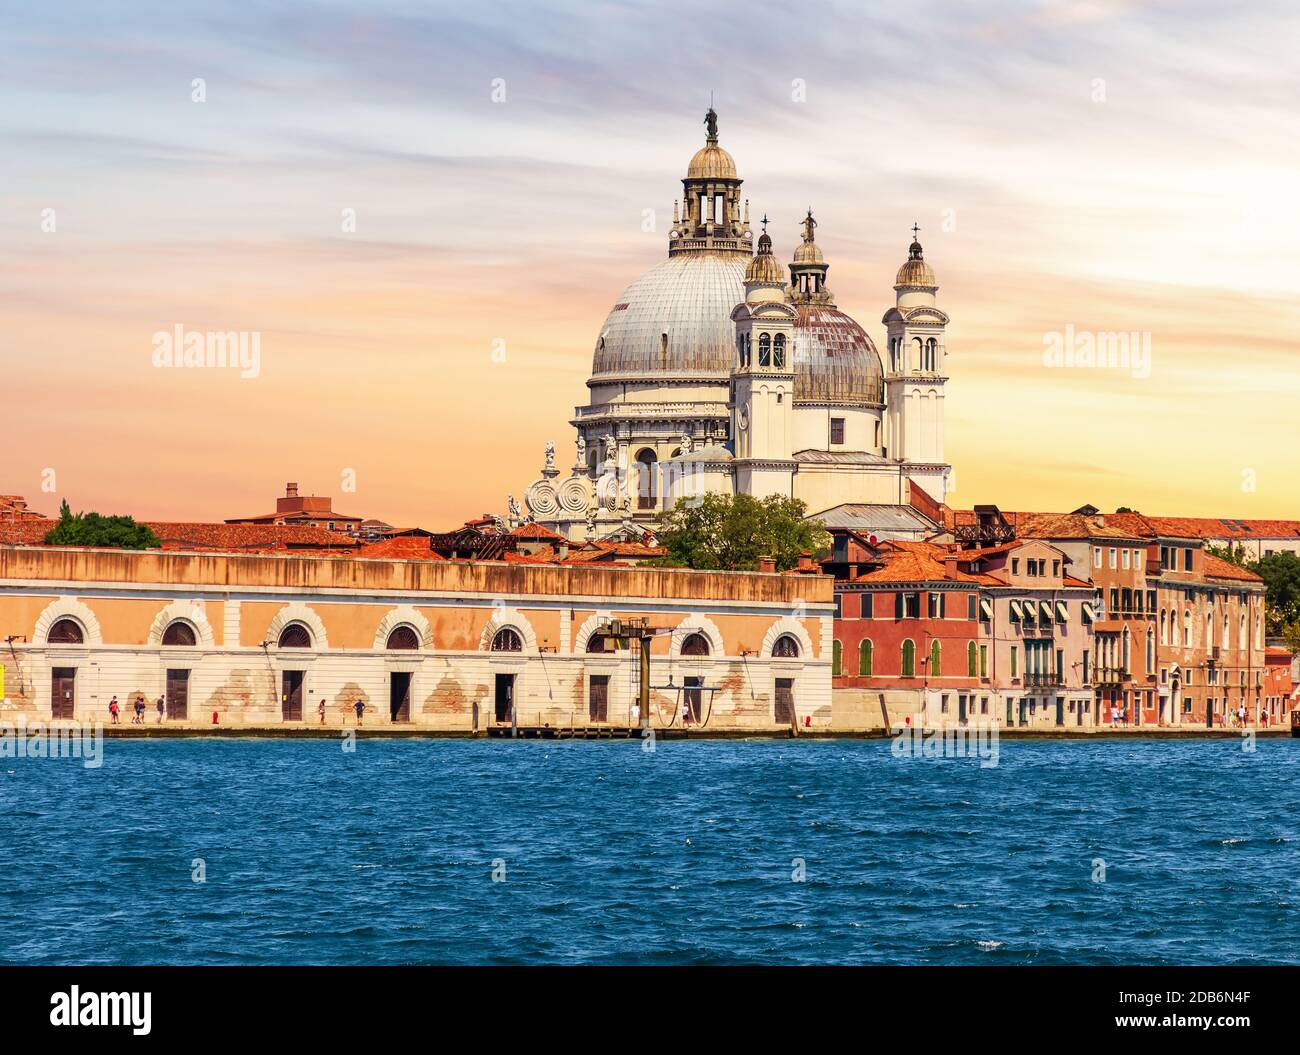 Santa Maria della Salute, view from the canal of Venice, Italy. Stock Photo